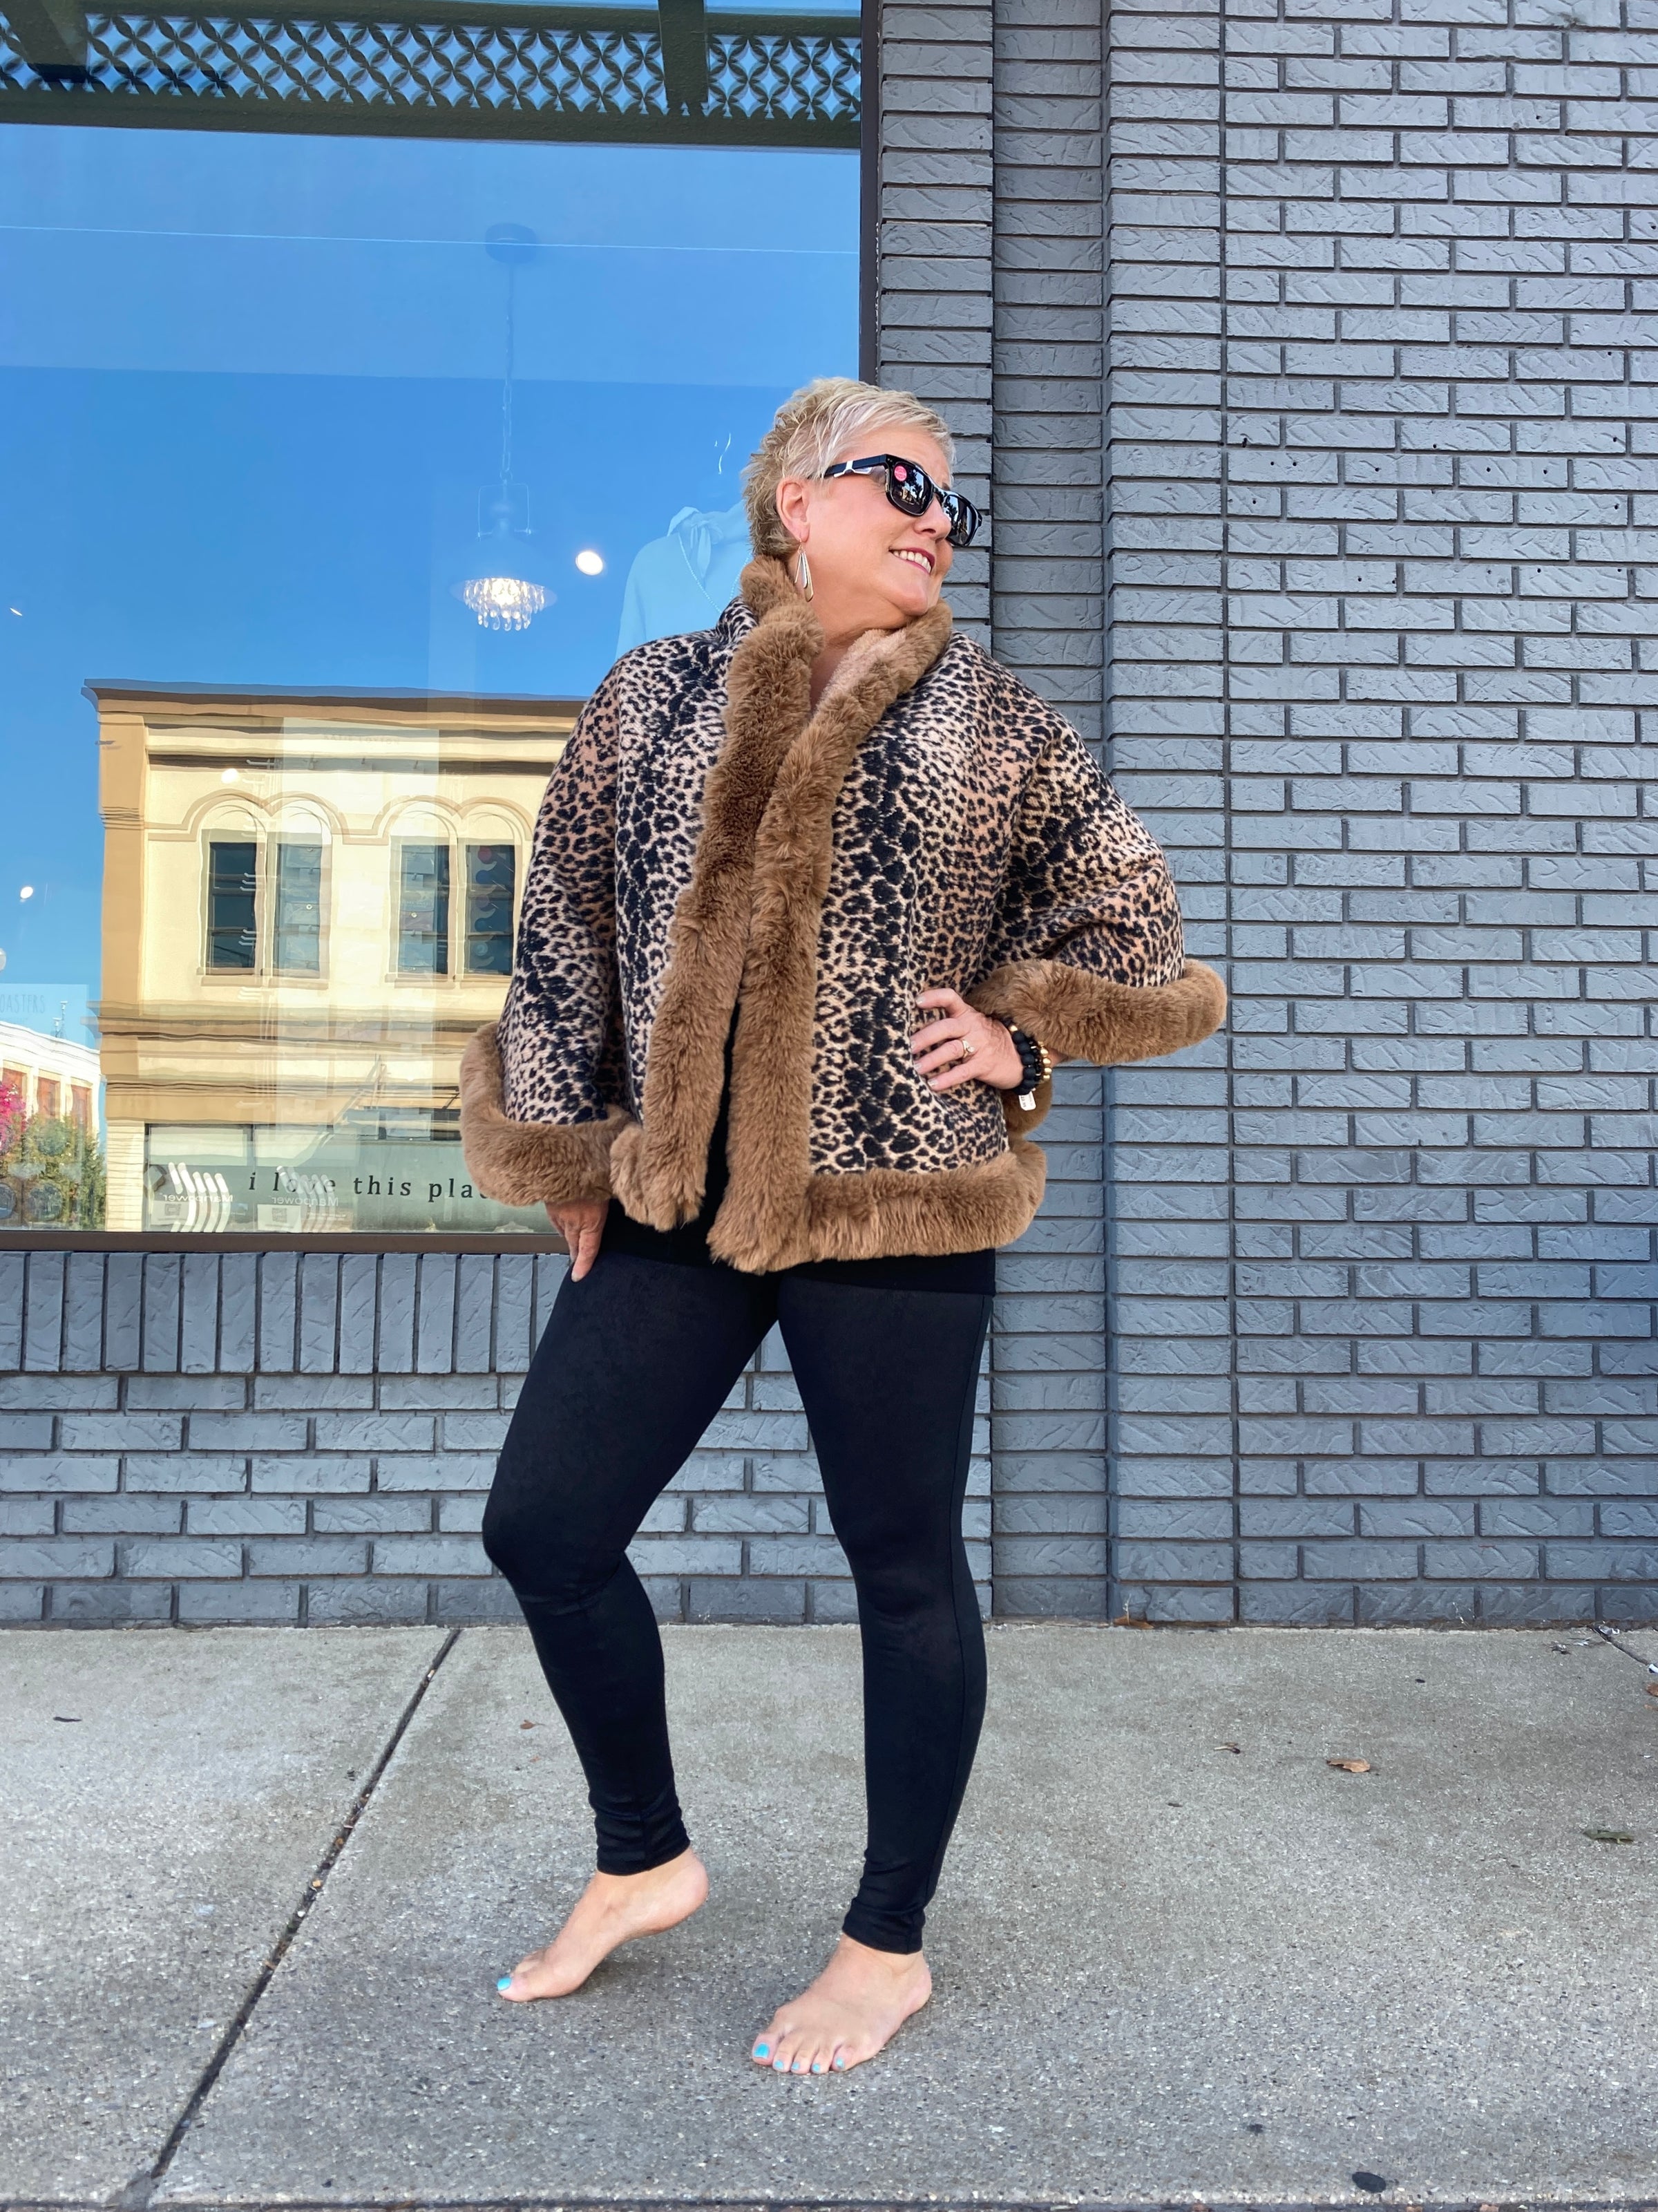 A fabulous looking woman wearing black leggings and a stunning leopard print kimono jacket with brown faux fur lining